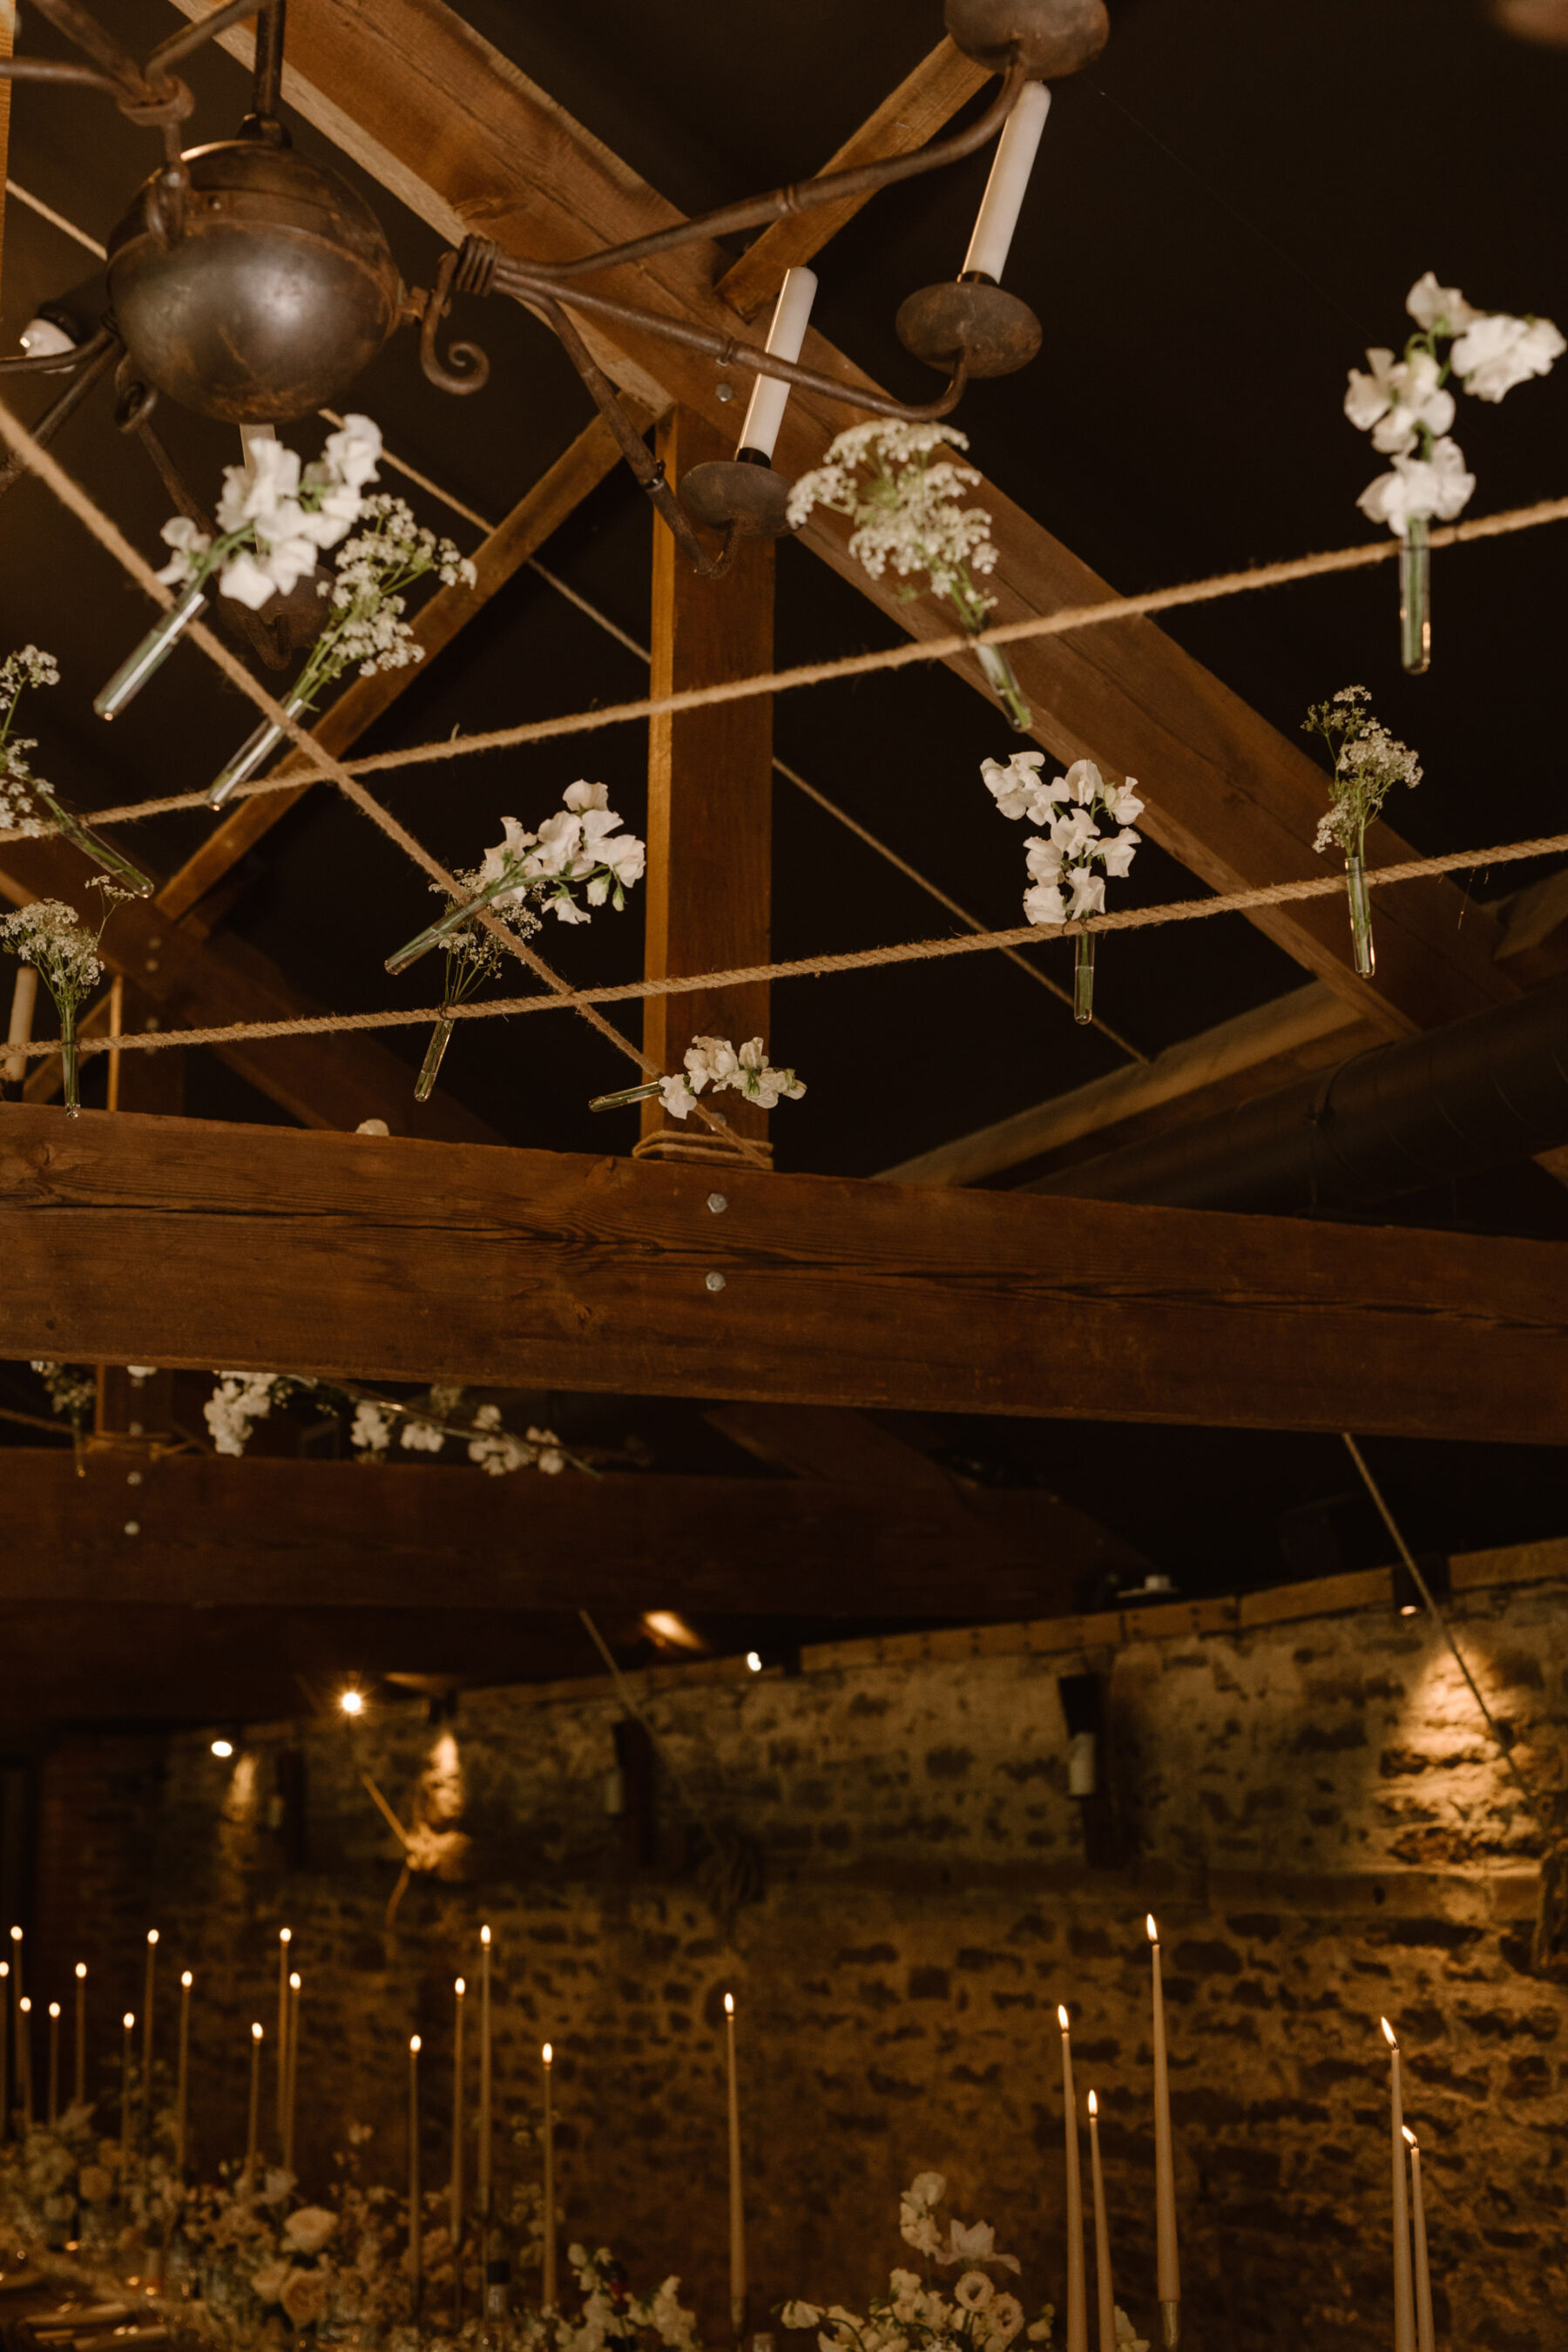 Flowers hanging from the barn ceiling at Dewsall Court. Agnes Black Photography.